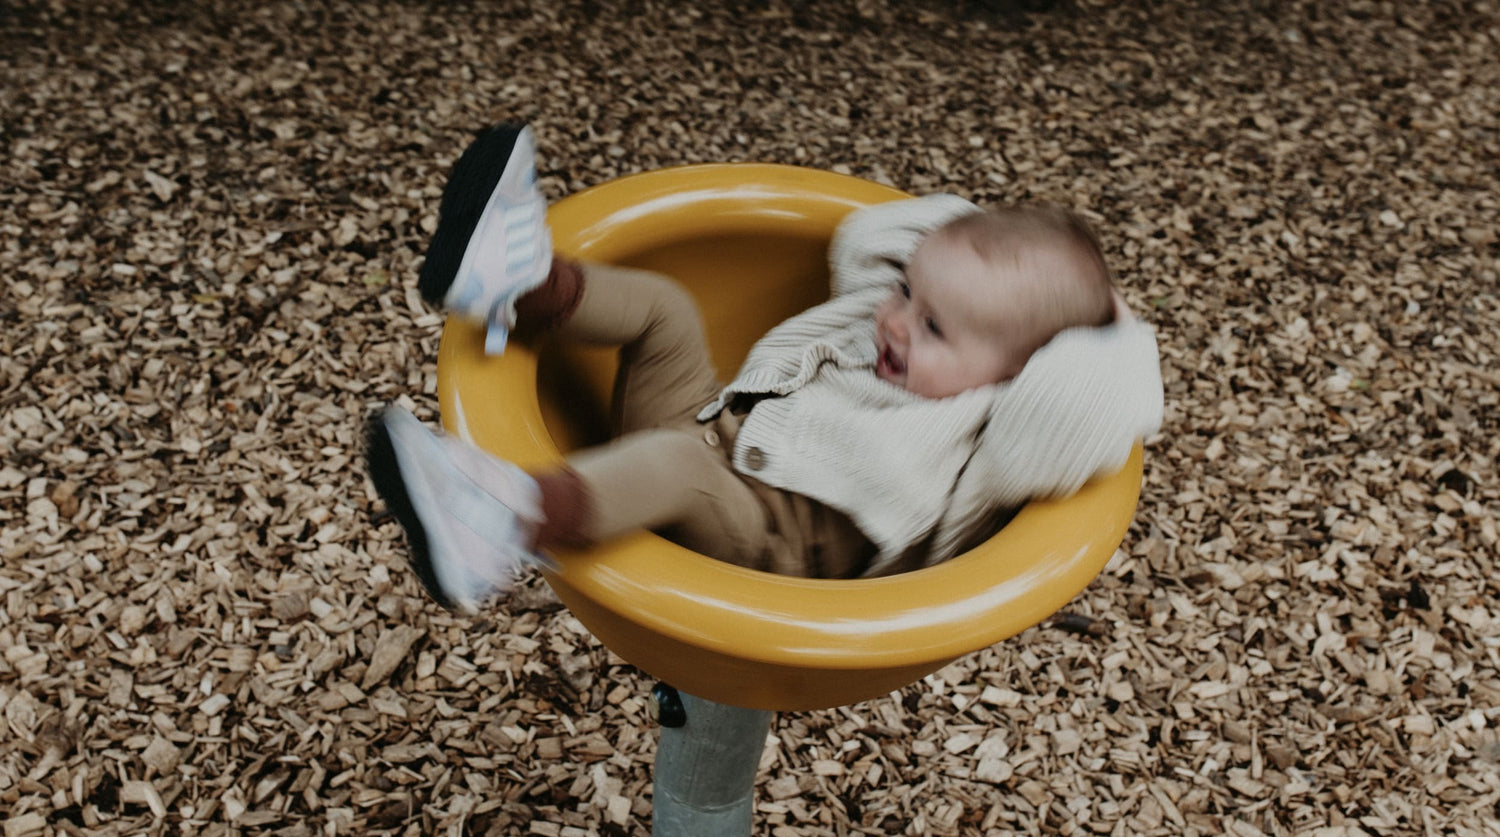 Laughing Baby laying in a yellow bowl wearing brown and beiges organic baby clothes from OiOiOi